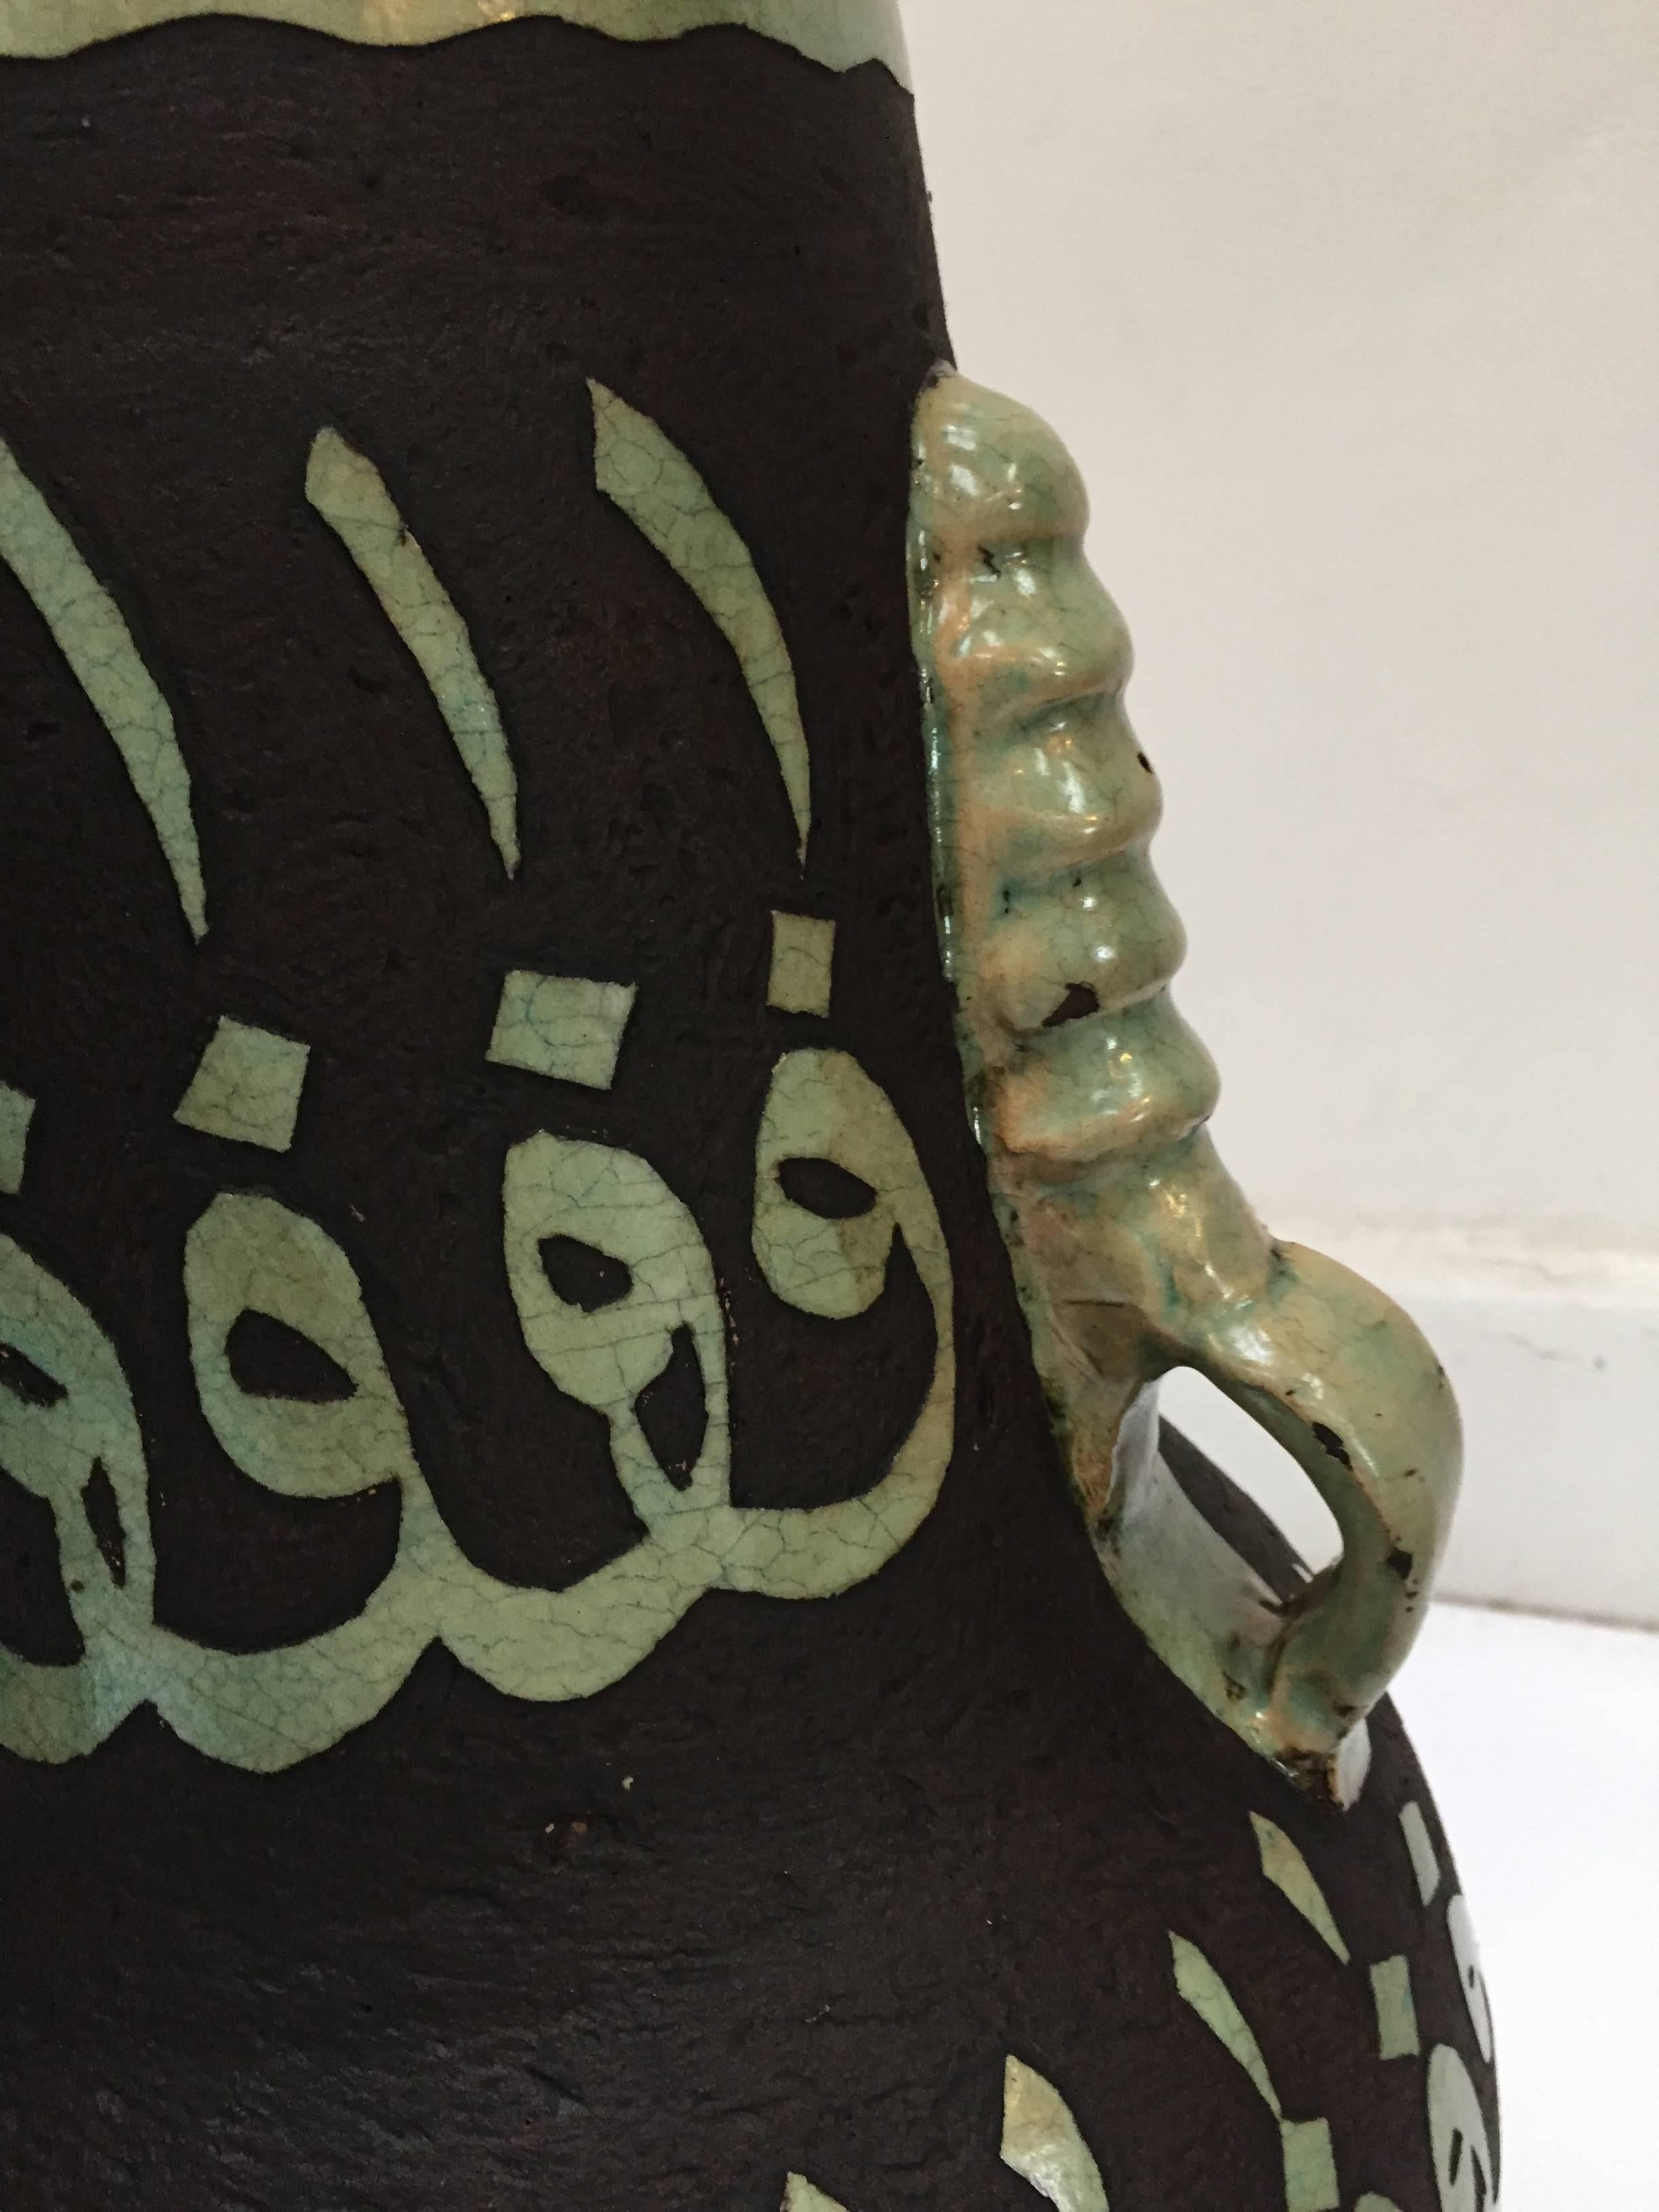 Pair of Green Moroccan Ceramic Vases with Chiseled Arabic Calligraphy Writing For Sale 2